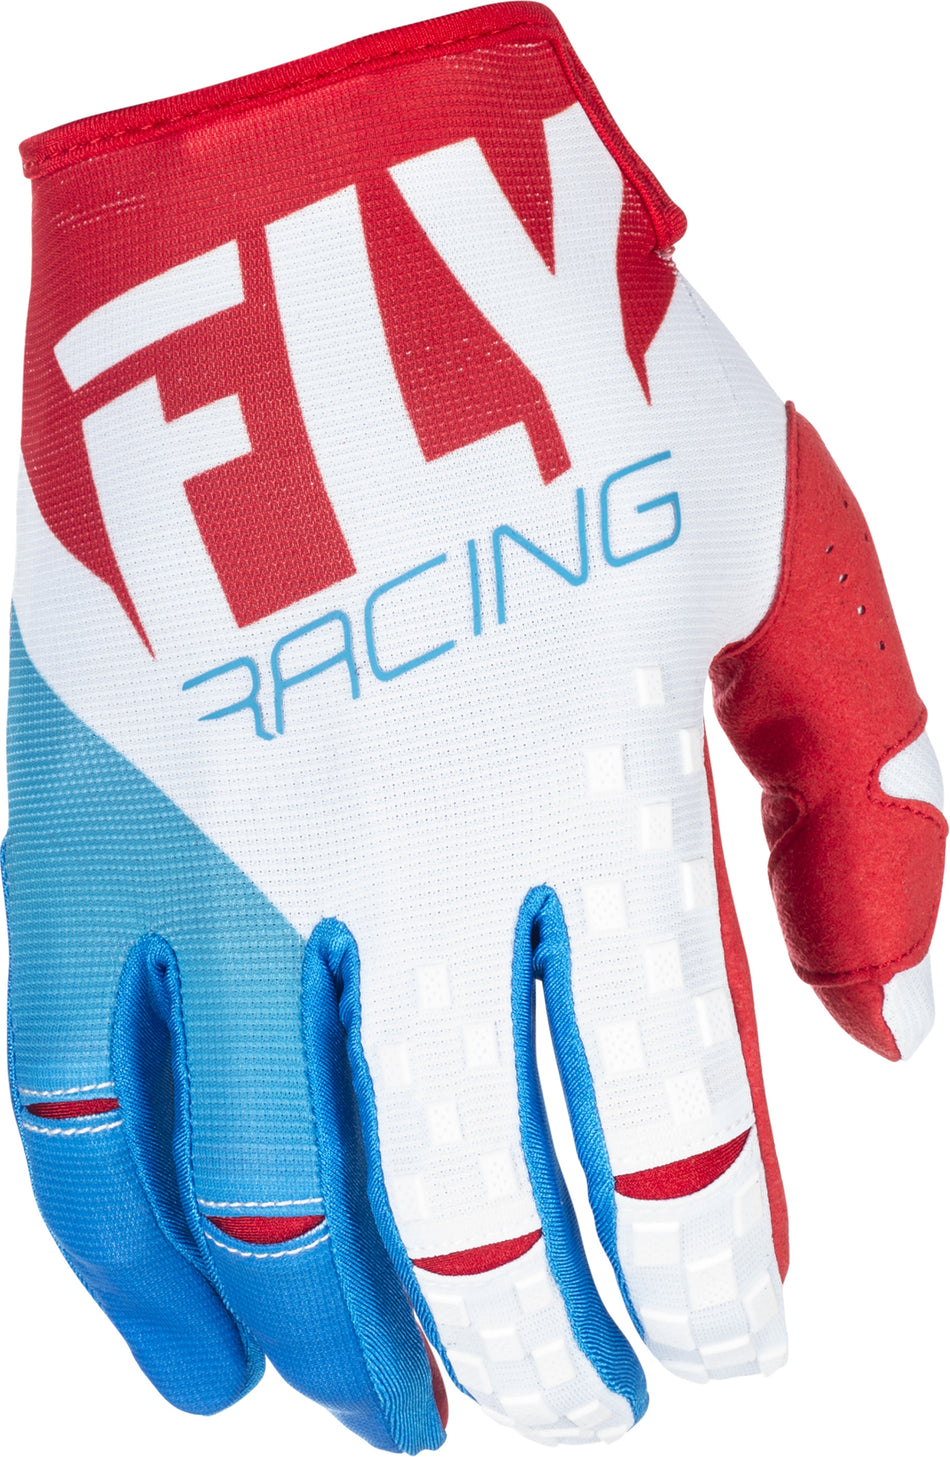 FLY RACING Kinetic Gloves Red/White/Blue Sz 11 371-41311